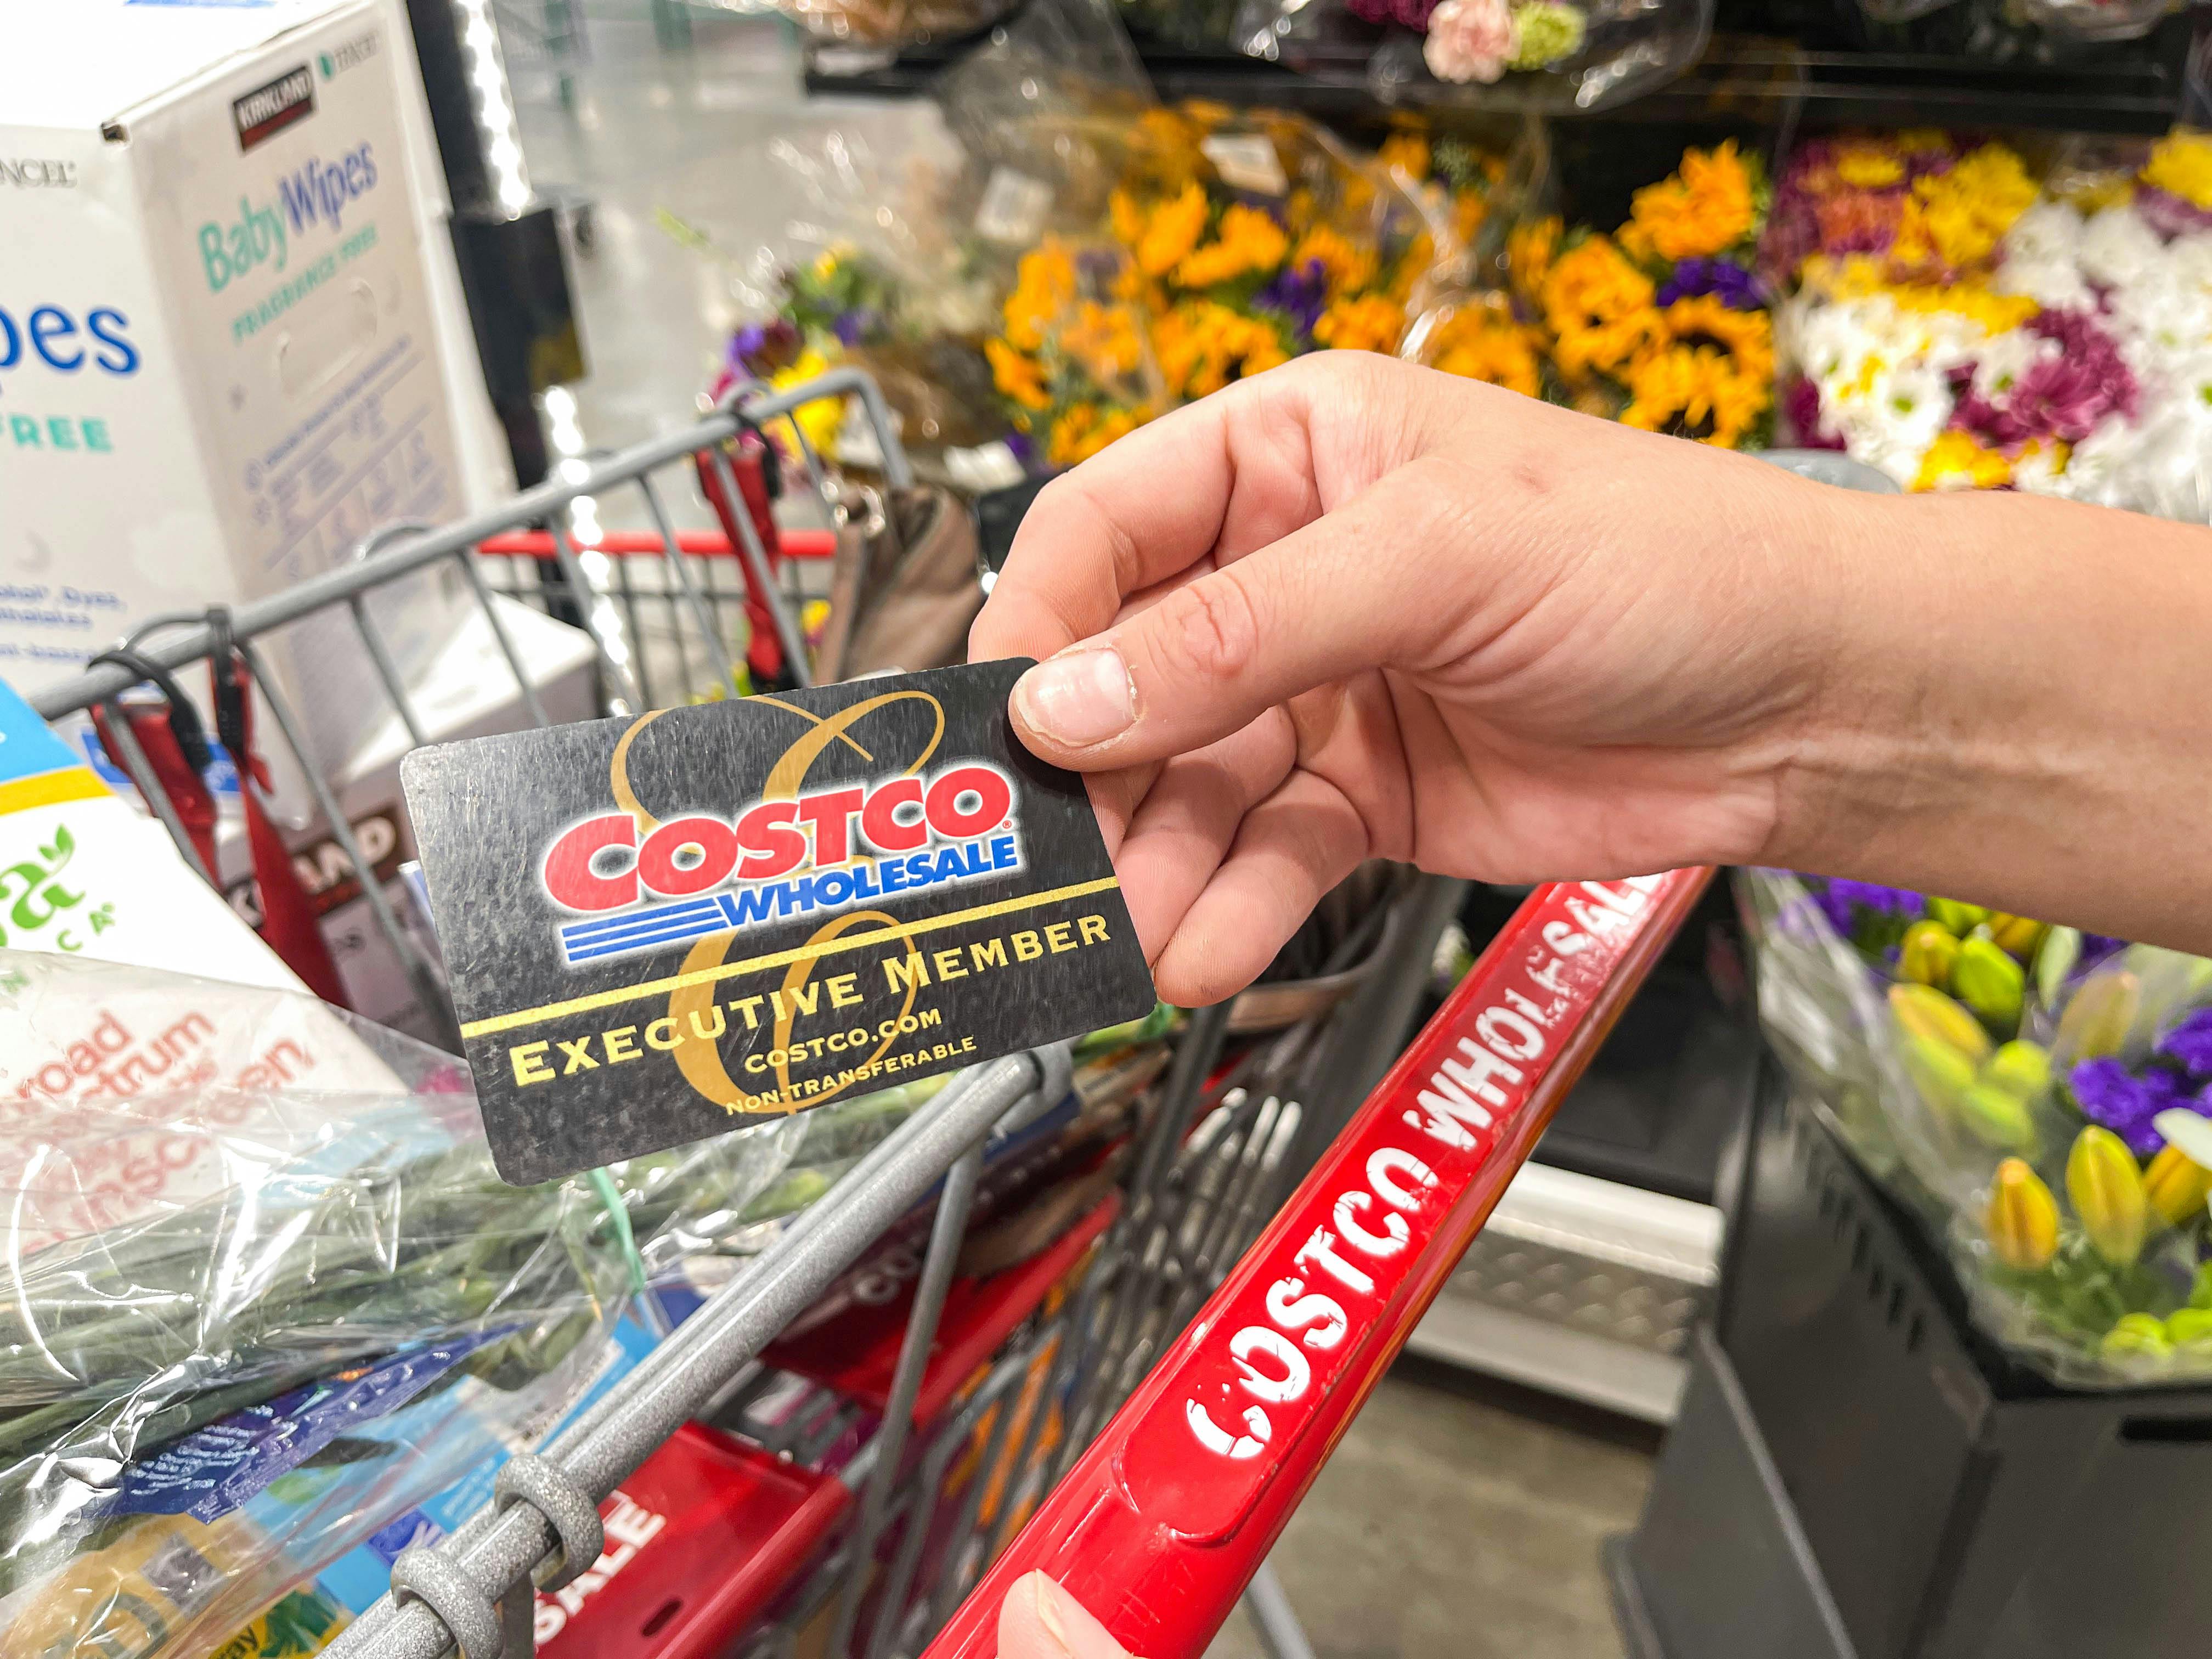 aperson holding a costco card in front of cart